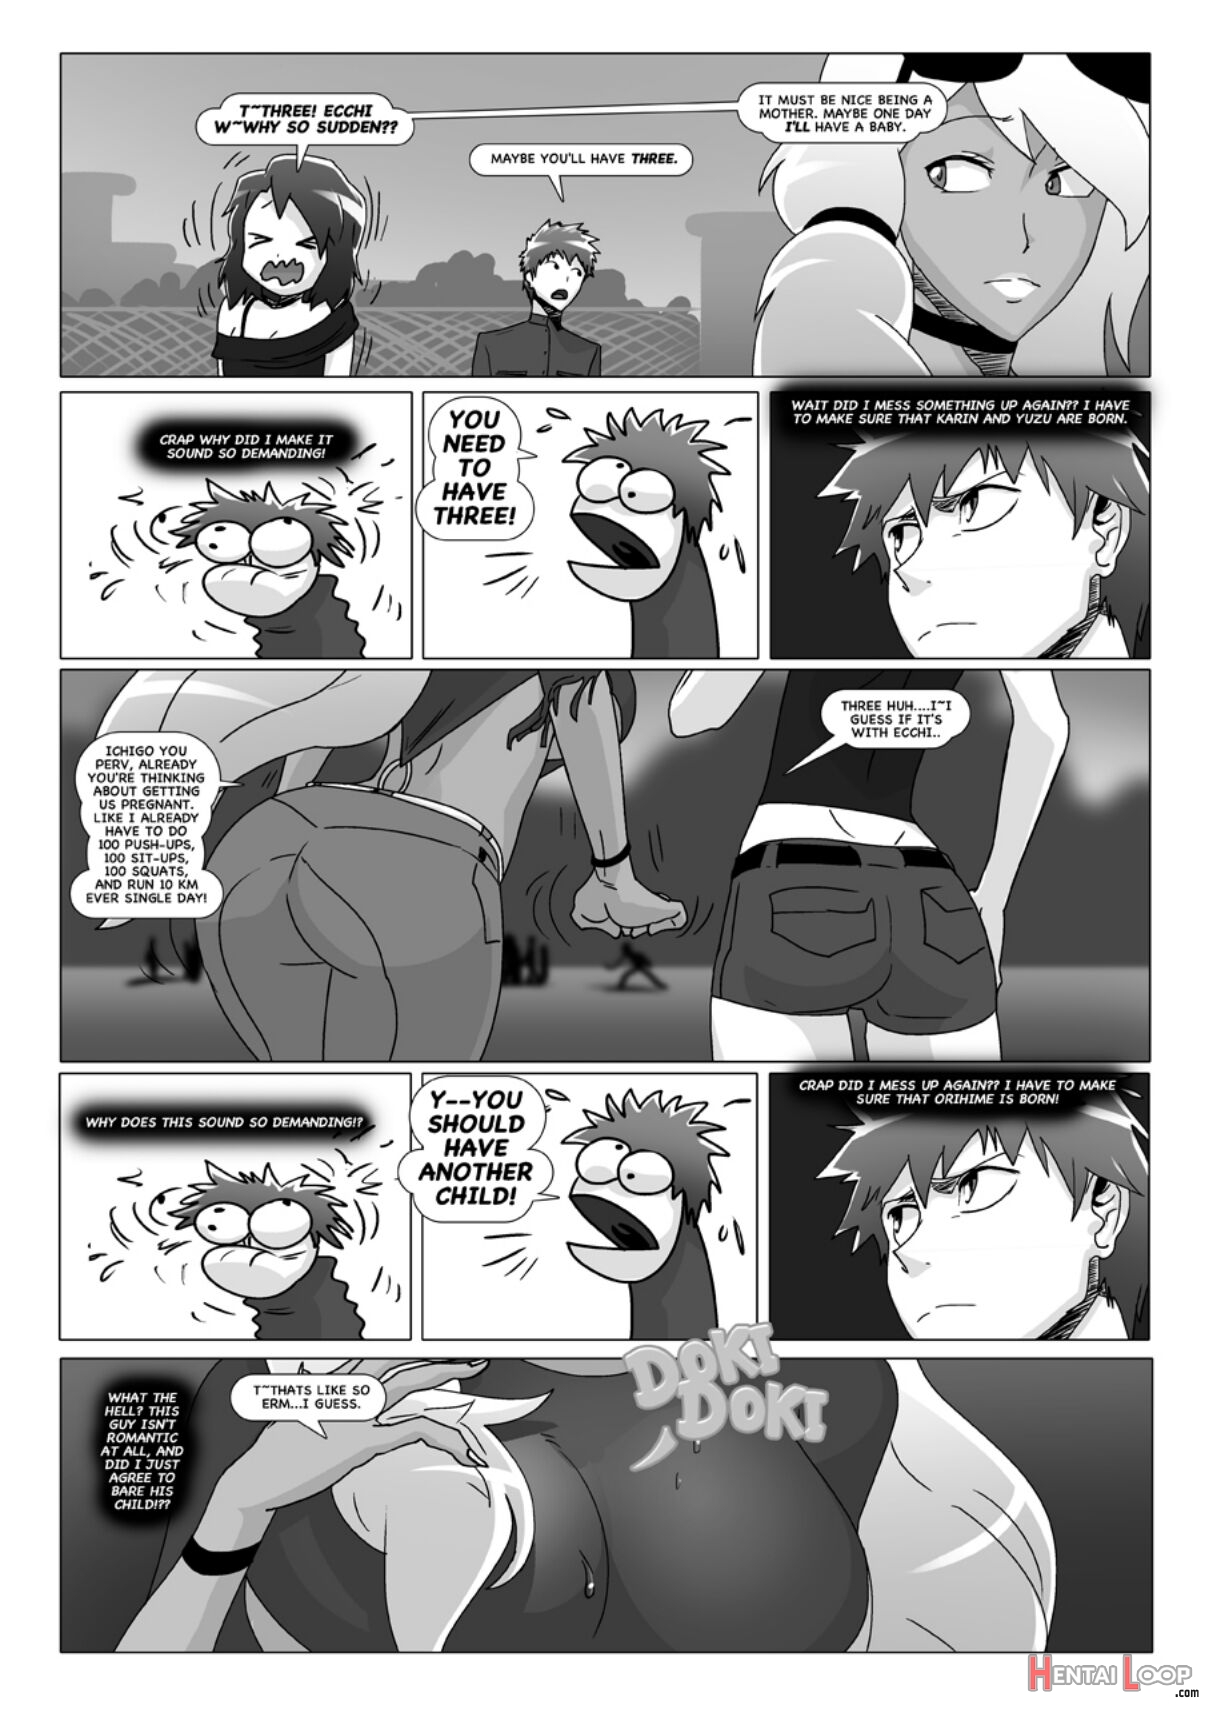 Happy To Serve You - Xxx Version page 442